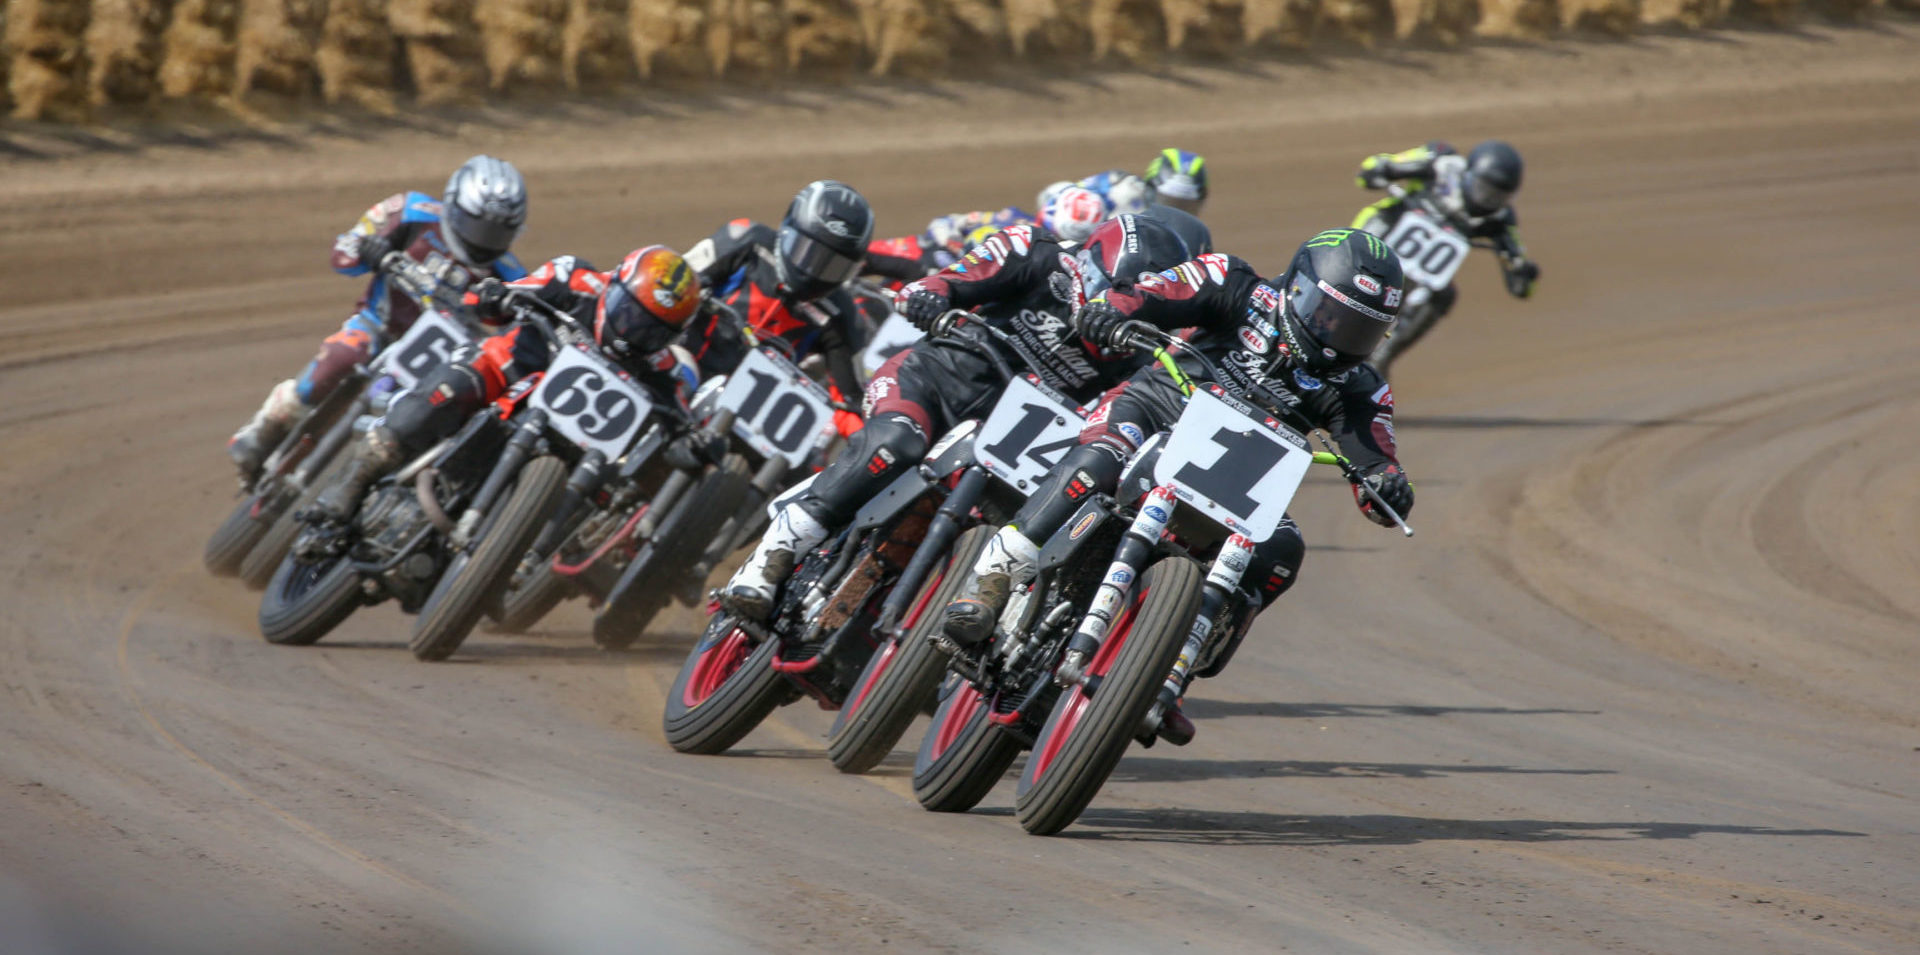 Action from an AFT Twins heat race in Springfield, Illinois. Photo by Scott Hunter, courtesy of American Flat Track.